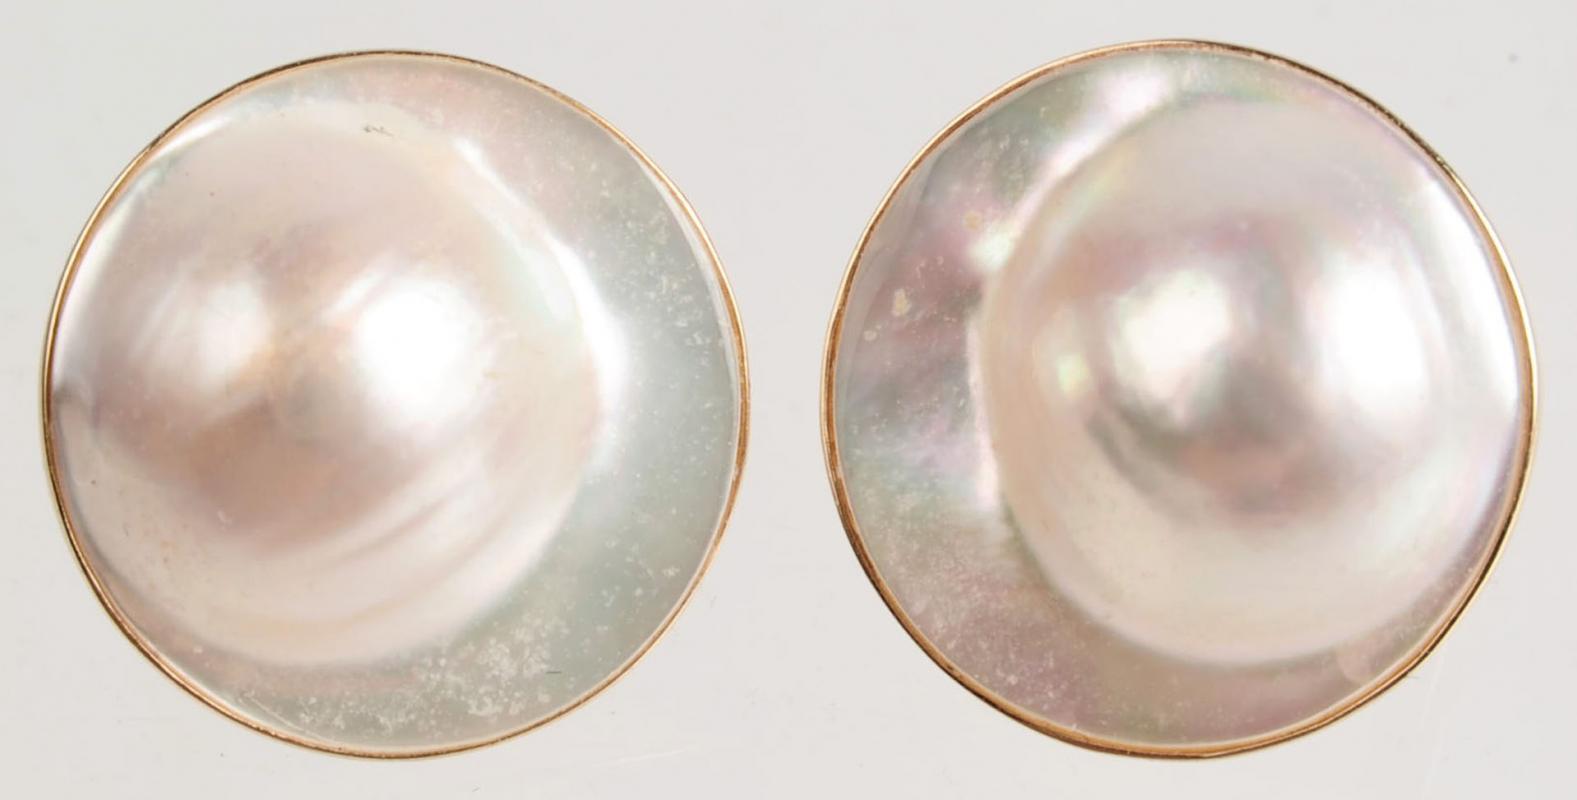 A PAIR OF 14K GOLD BLISTER PEARL EARRINGS